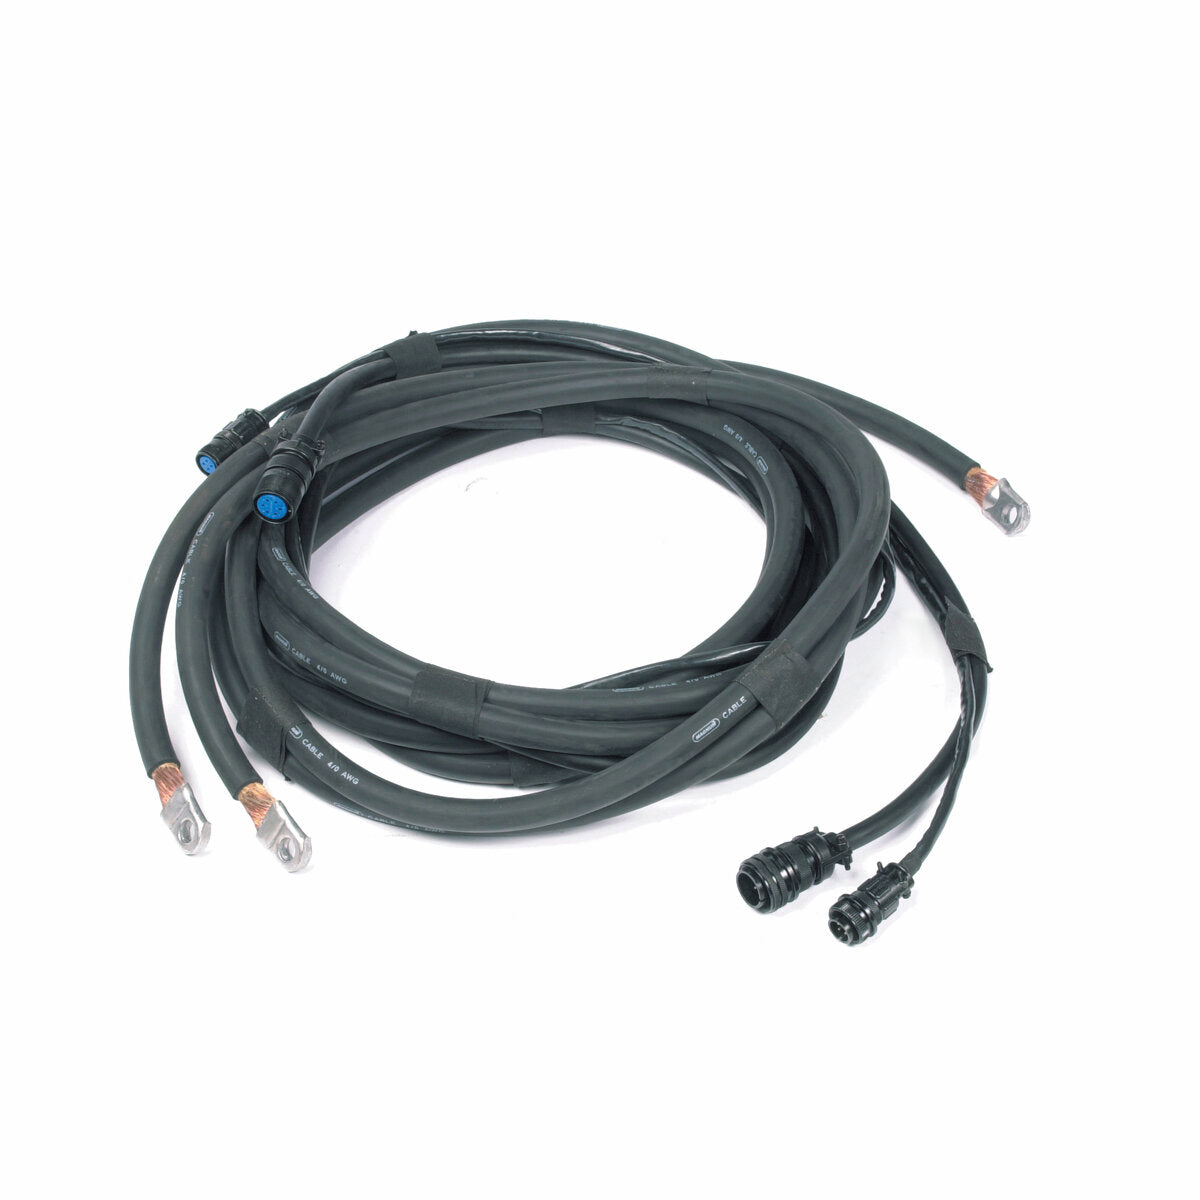 Lincoln Electric - Control to Head Extension Cable - 46 ft - K338-46